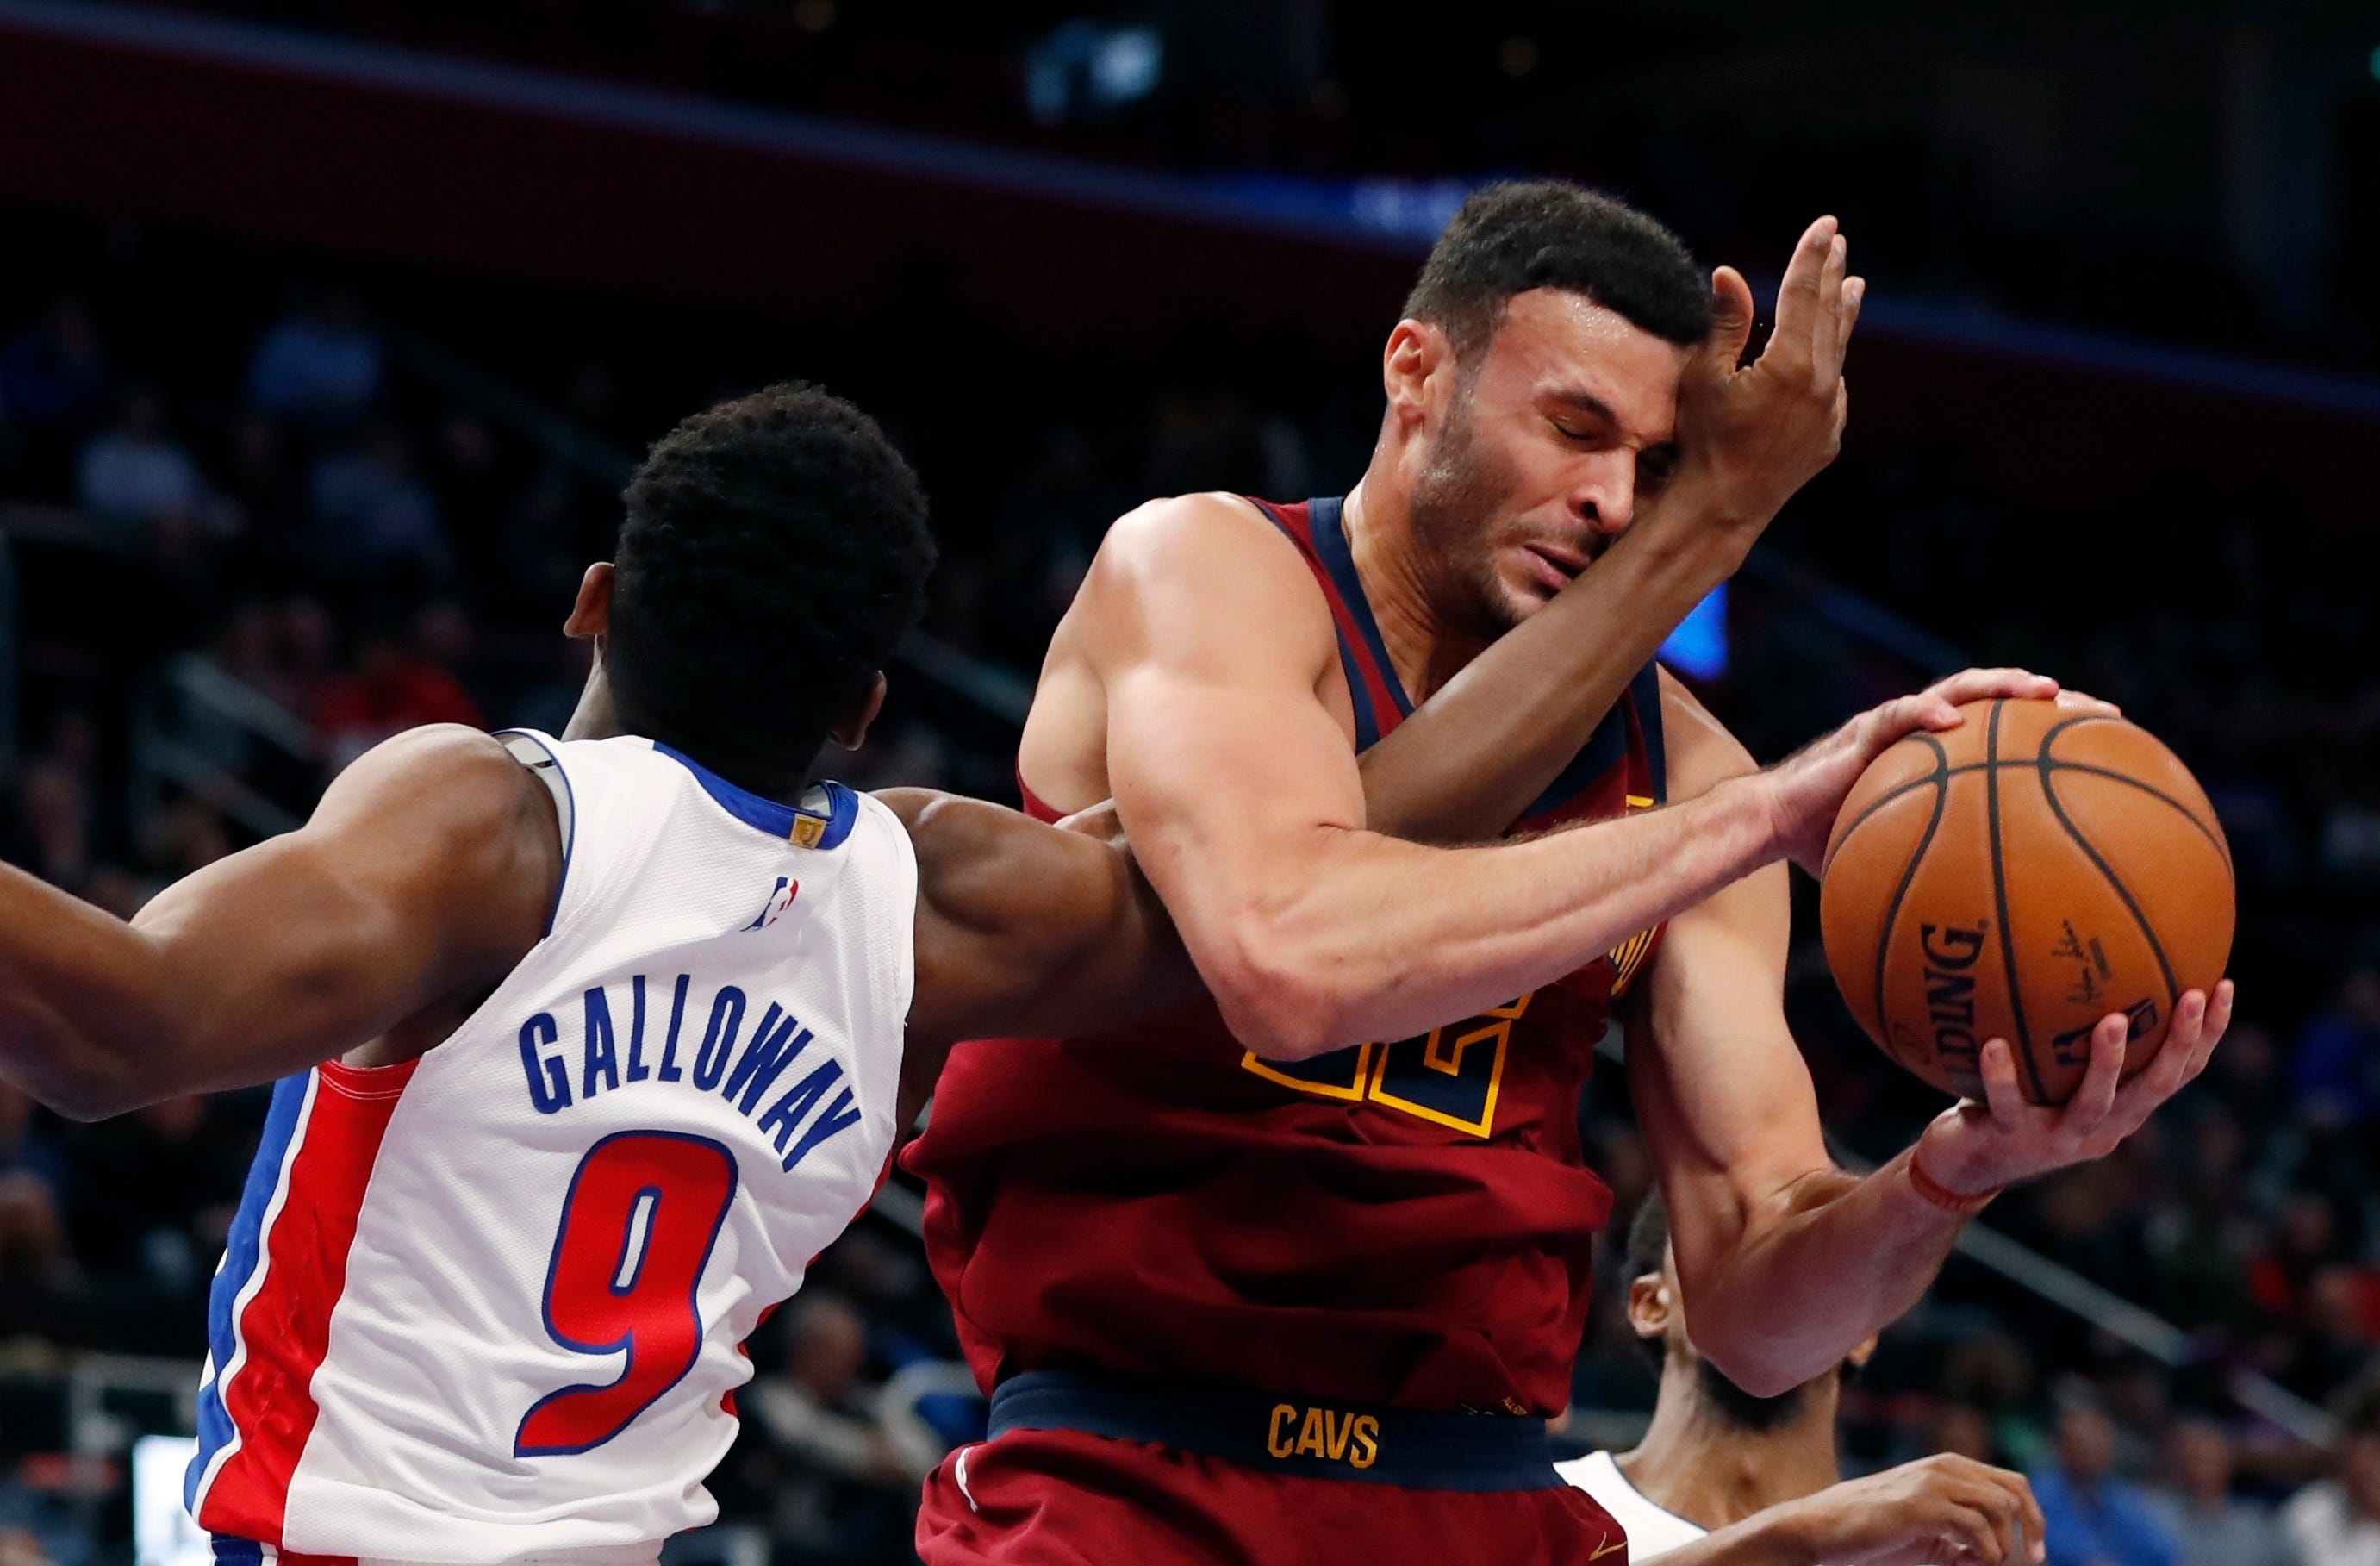 Cleveland Cavaliers forward Larry Nance Jr. (22) is fouled by Detroit Pistons guard Langston Galloway (9) during the second half.